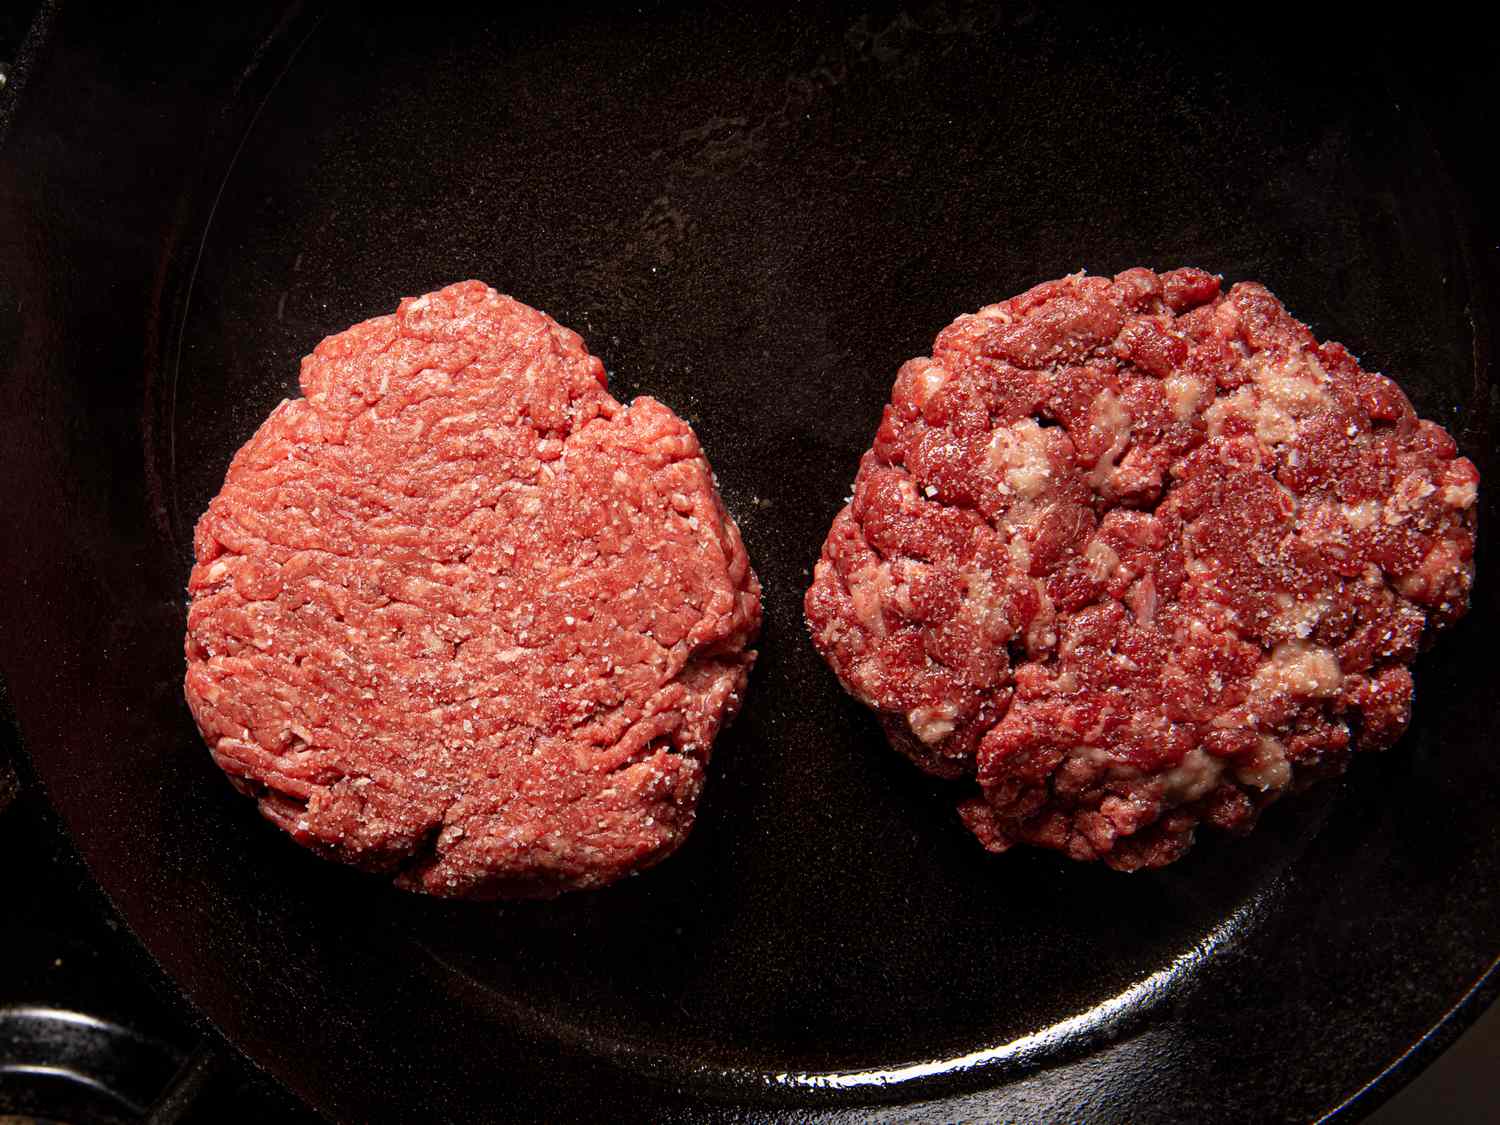 One normal beef burger and one waygu burger side by side in a pan